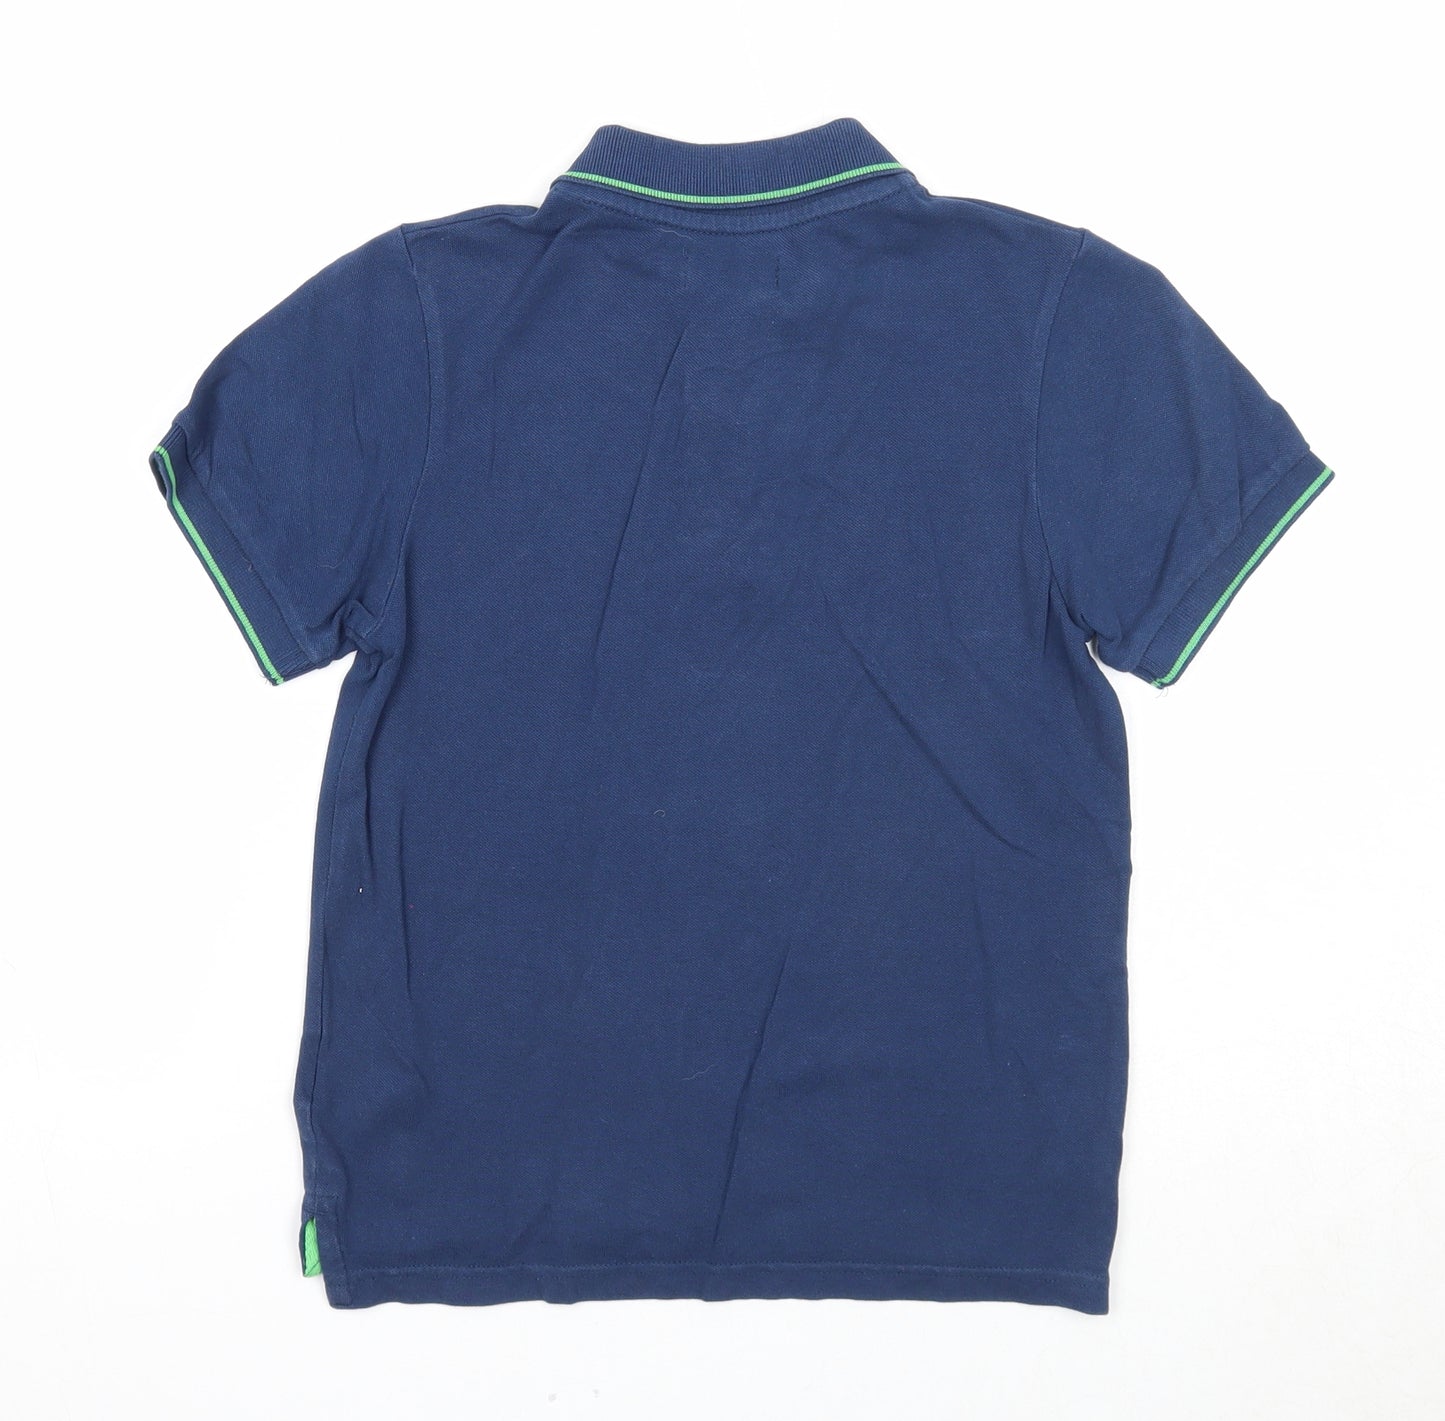 Dissident Boys Blue Cotton Basic Polo Size 7-8 Years Collared Button